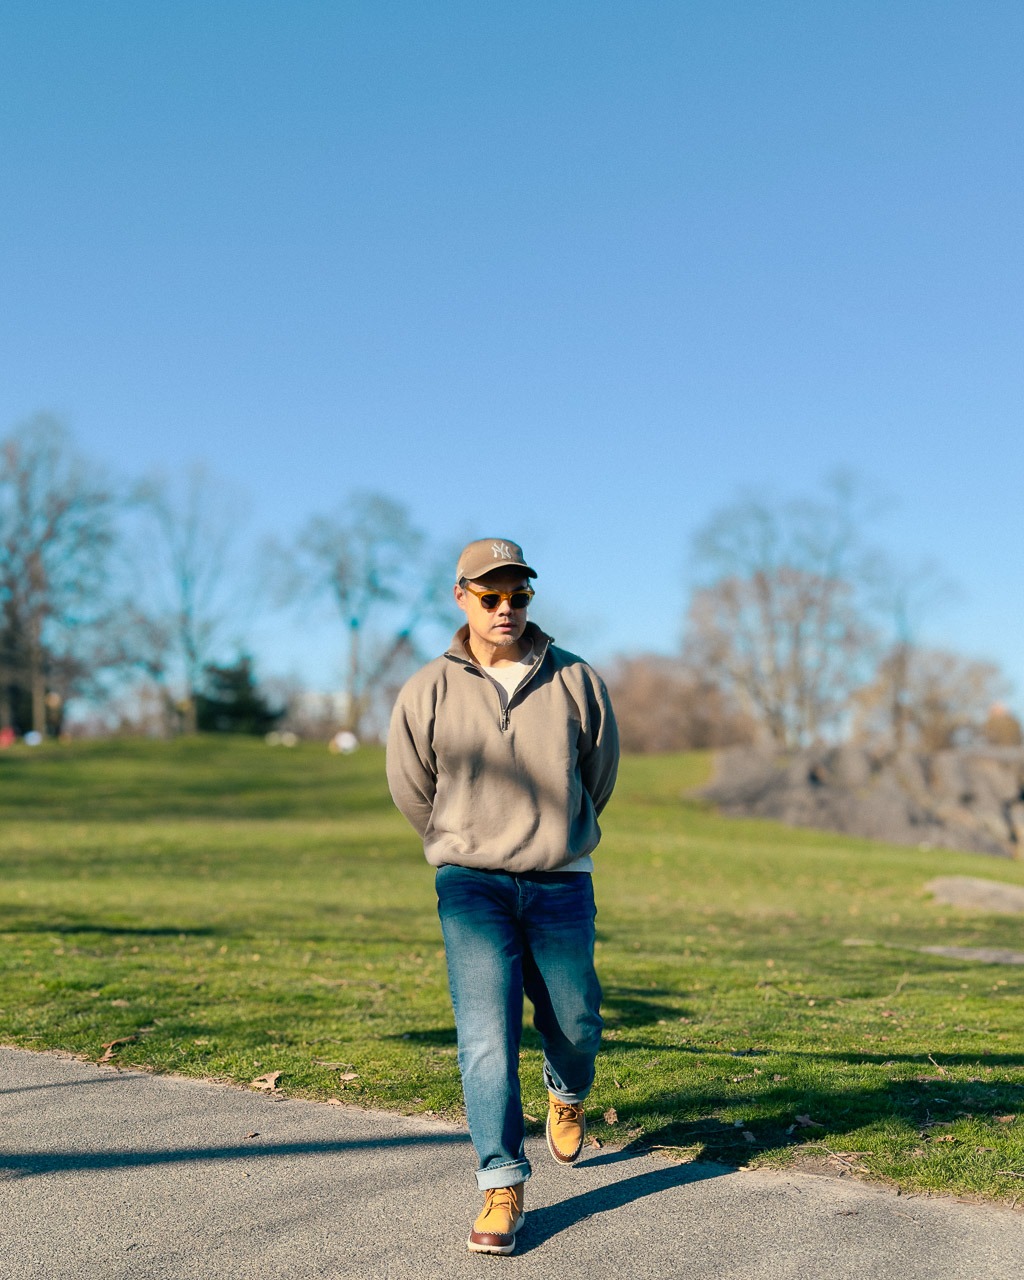 insanely handsome asian man wearing blue jeans quarter zip sweatshirt ballcap and sunglasses in a park with green grass walking towards camera